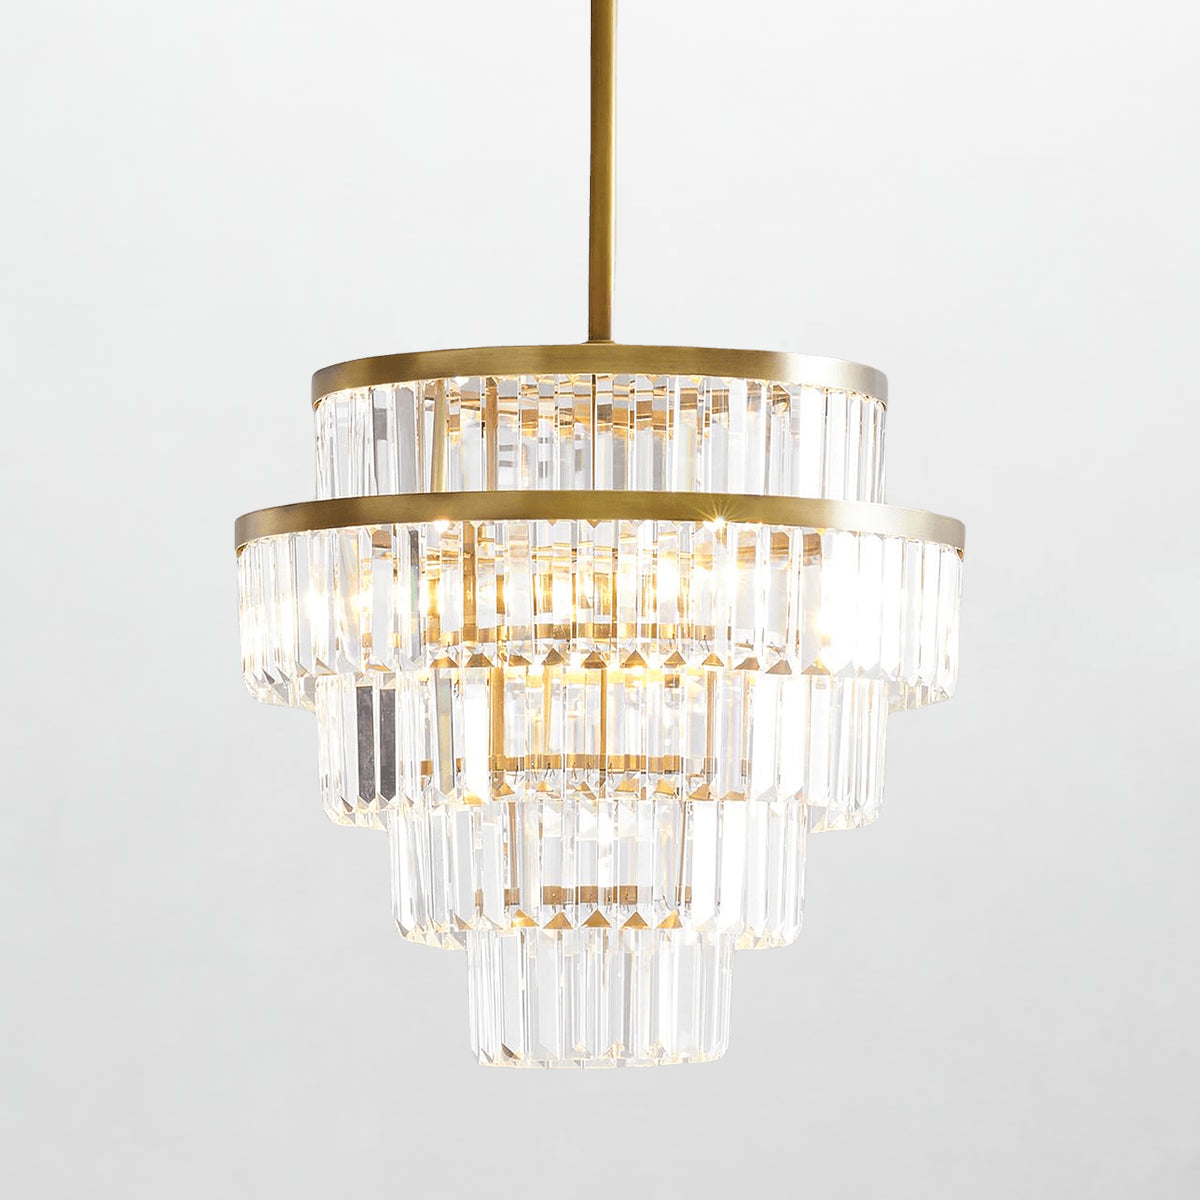 Crystal Elegance Vintage Brass Living Room Chandelier - Stunning Fixture with Clear Faceted Crystals